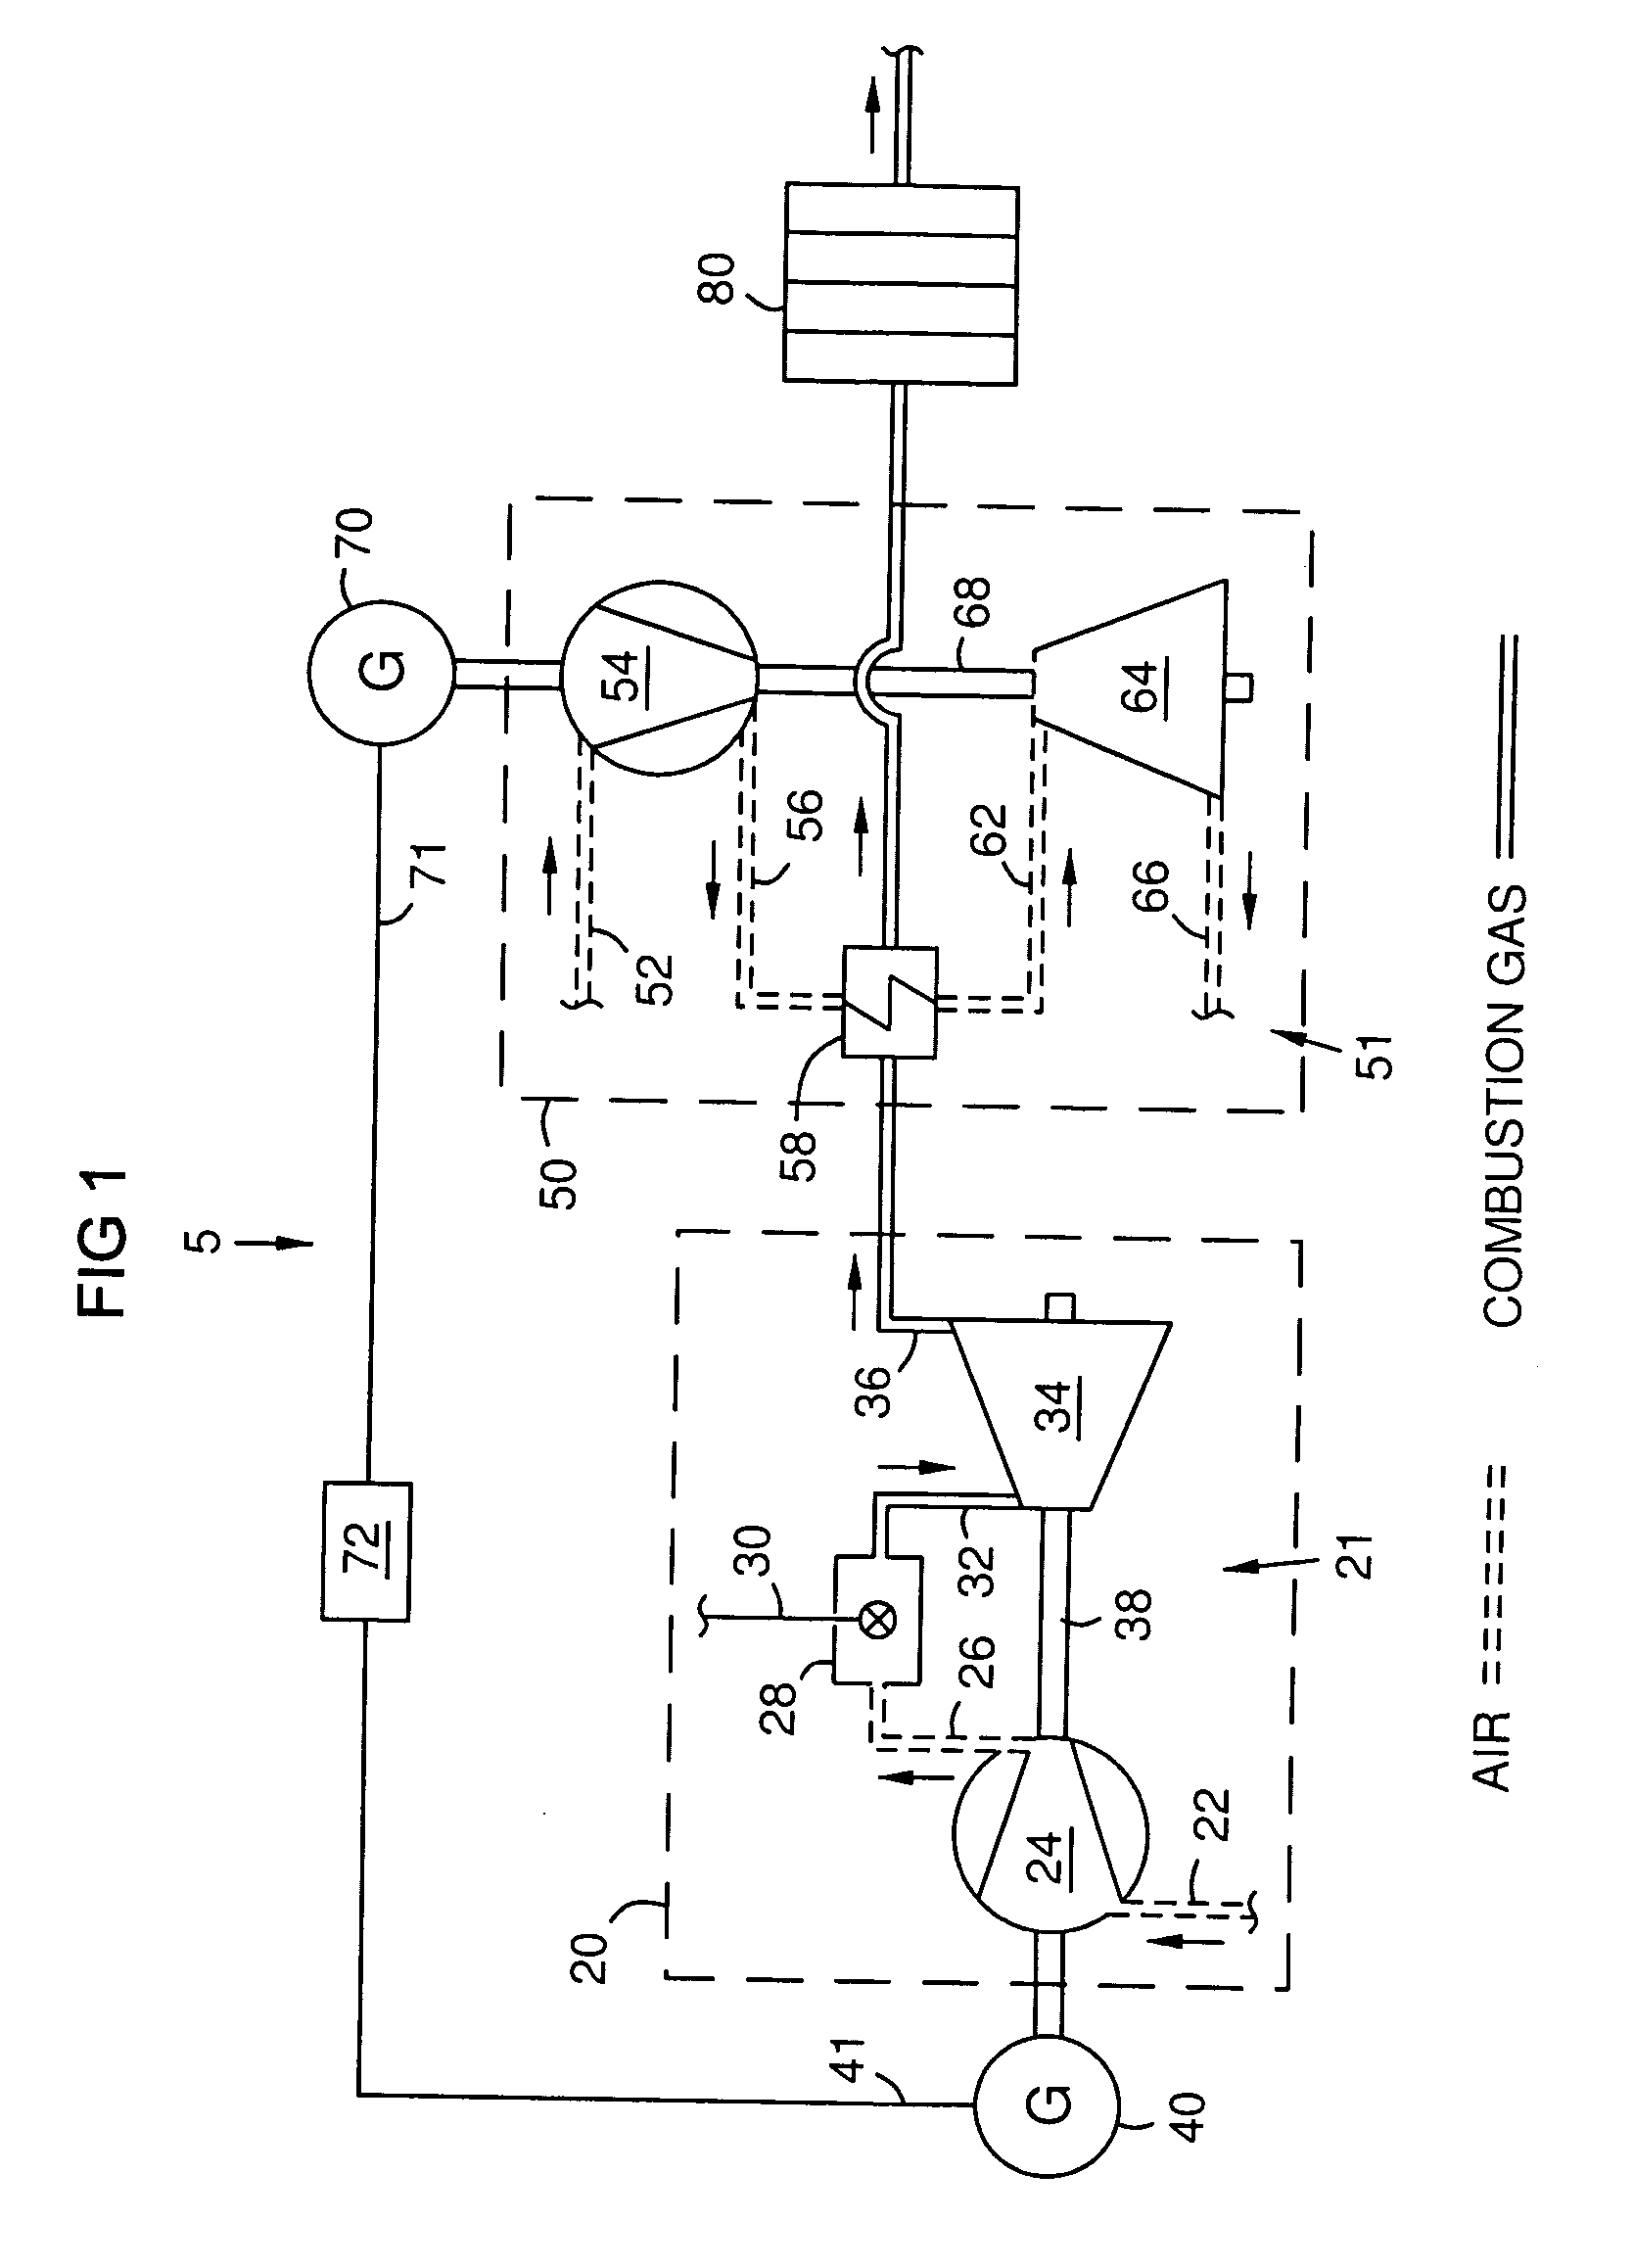 Heat recovery gas turbine in combined brayton cycle power generation